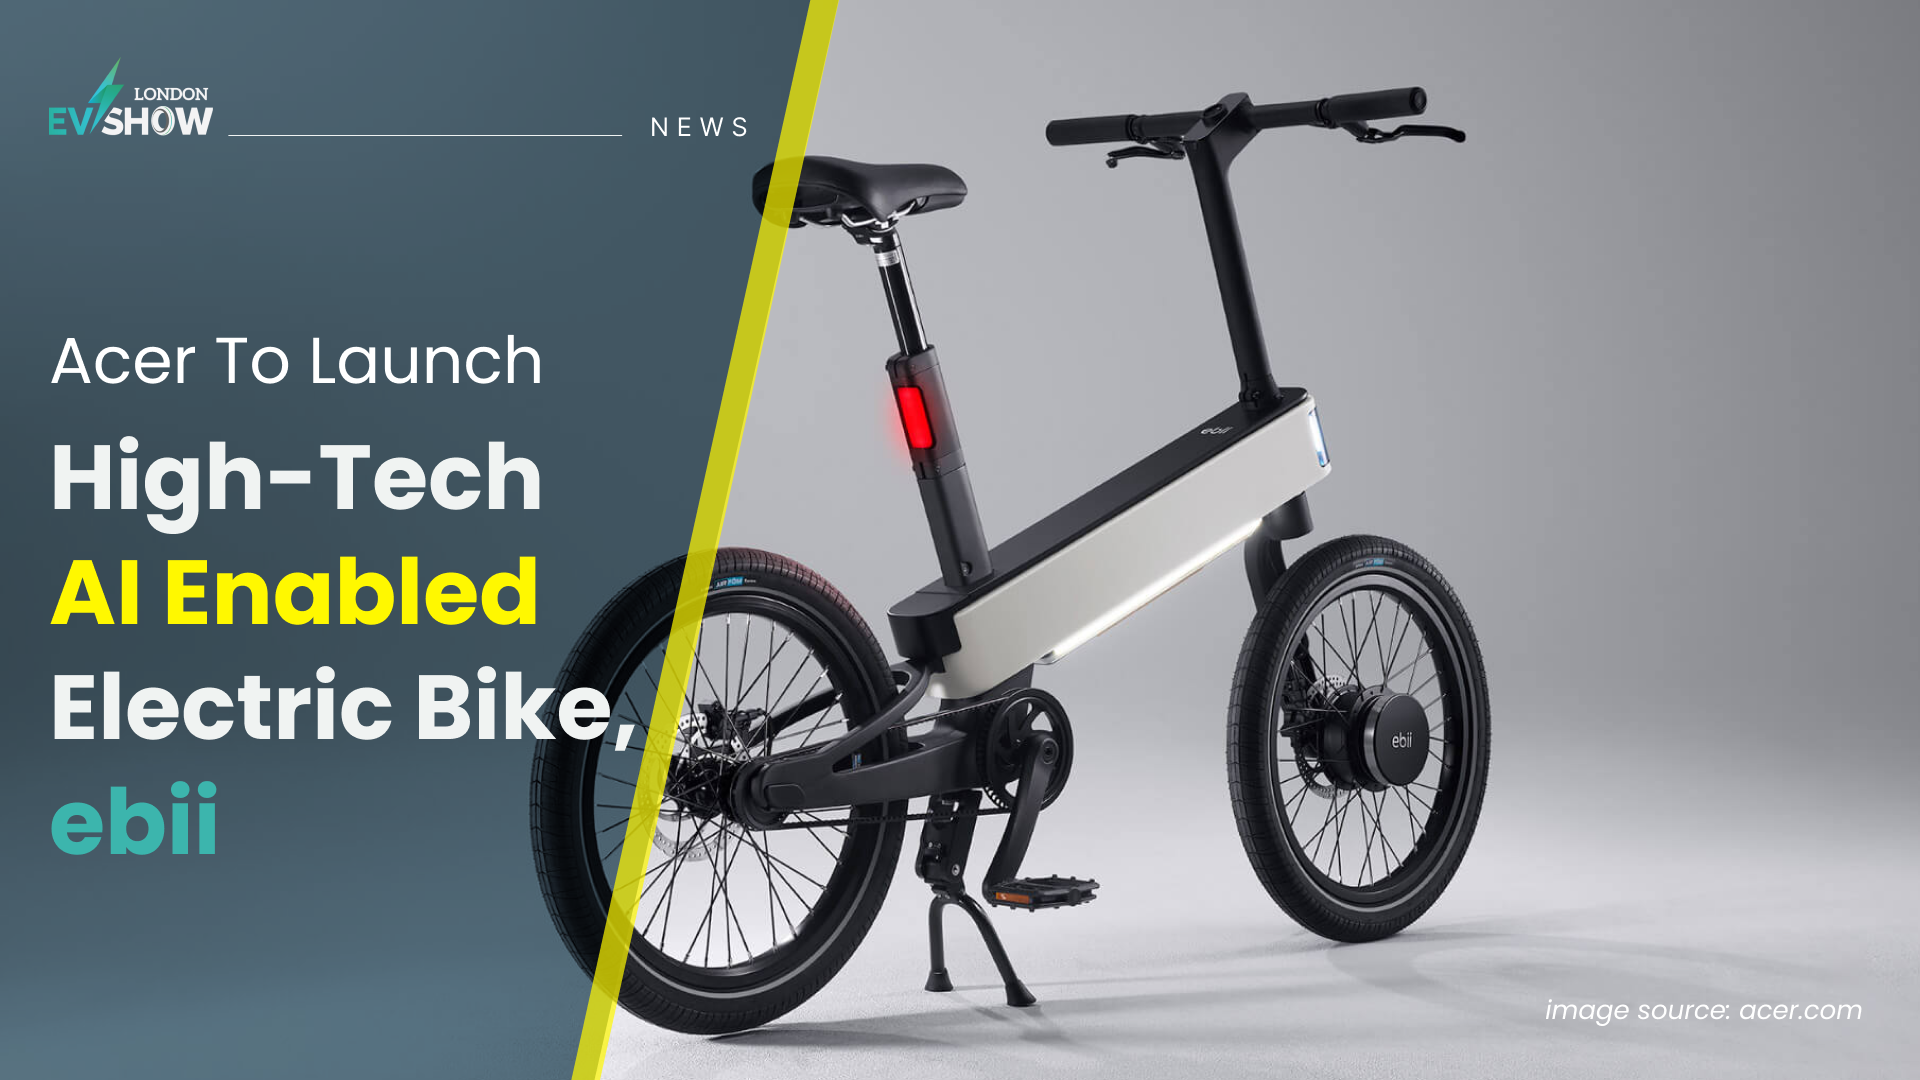 Acer To Launch High-Tech AI Enabled Electric Bike, ebii